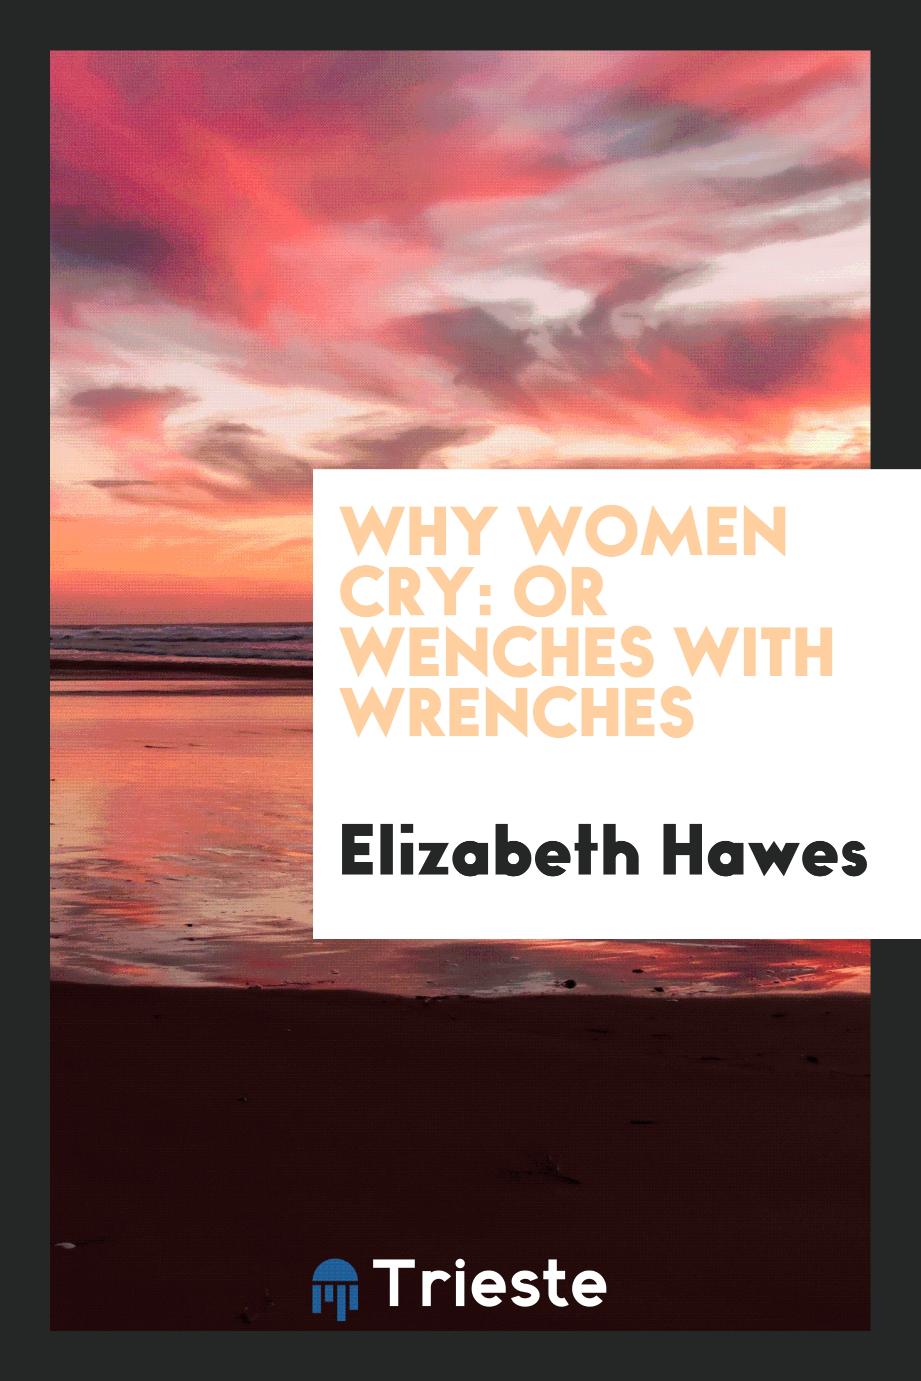 Why women cry: or Wenches with wrenches